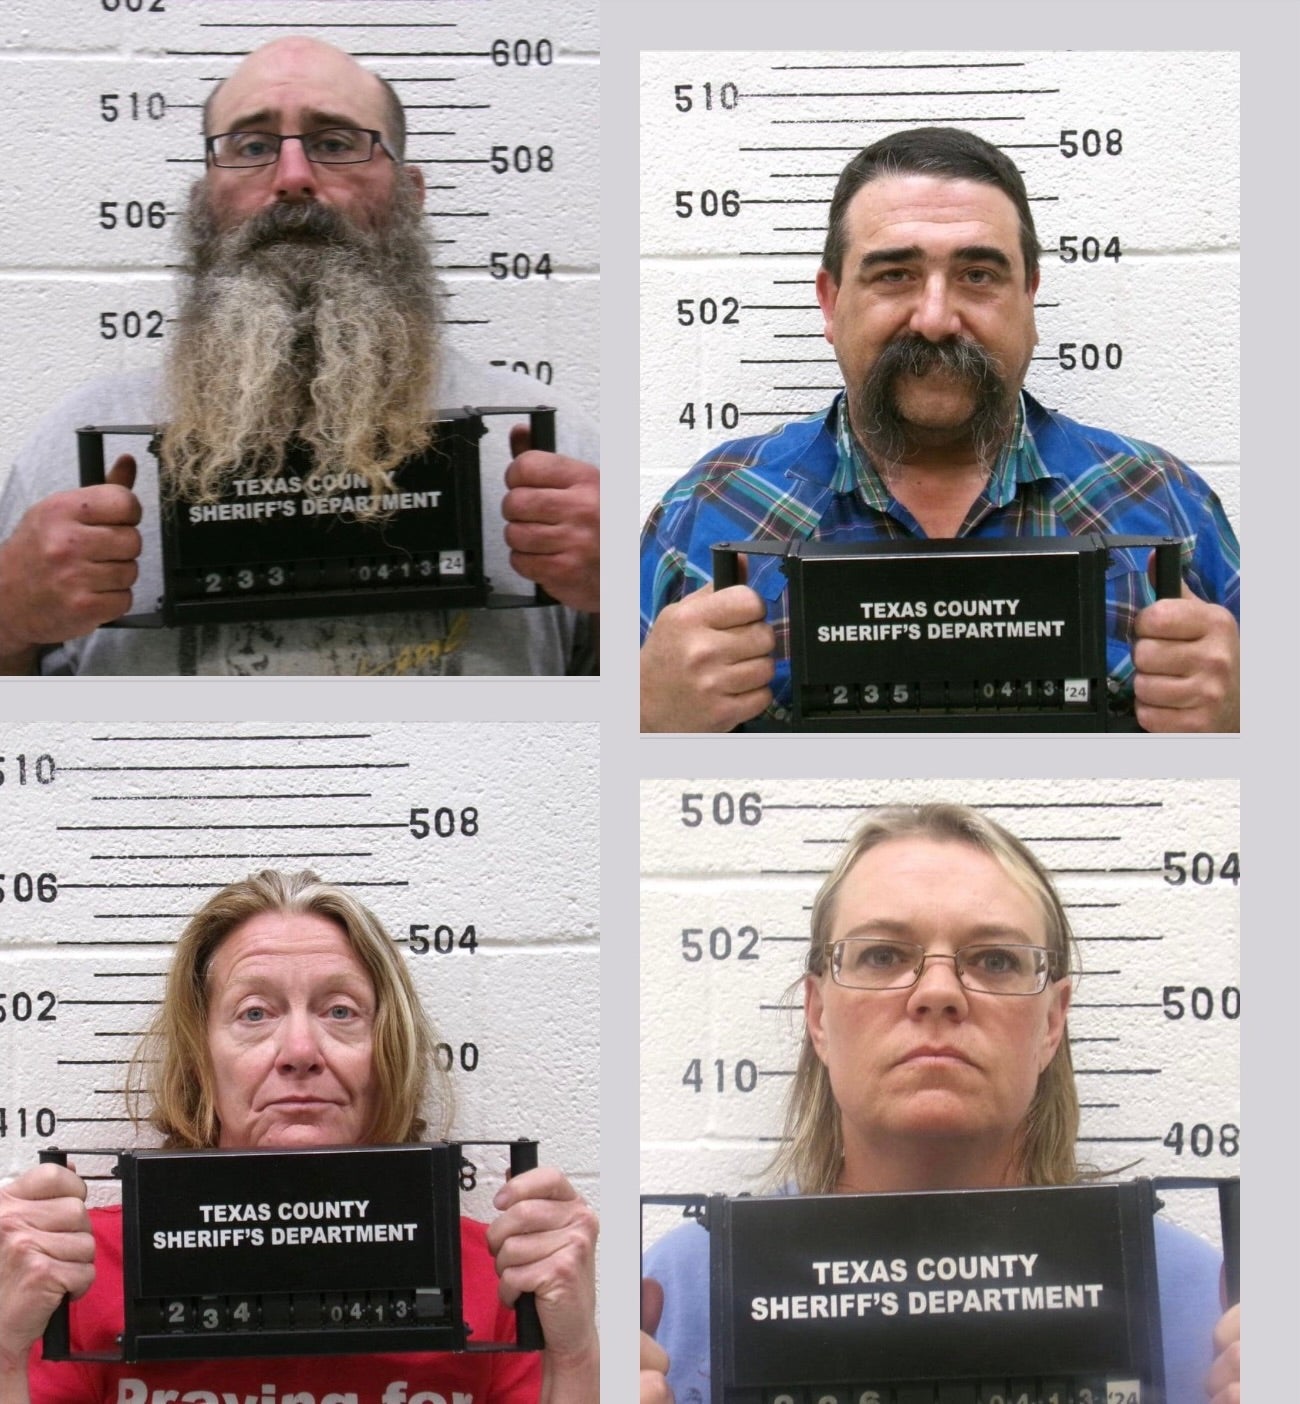 Cole Earl Twombly, Tad Bert Cullum, Tifany Machel Adams, and Cora Twombly were arrested and charged with murder in connection with the disappearance of Veronica Butler and Jilian Kelley